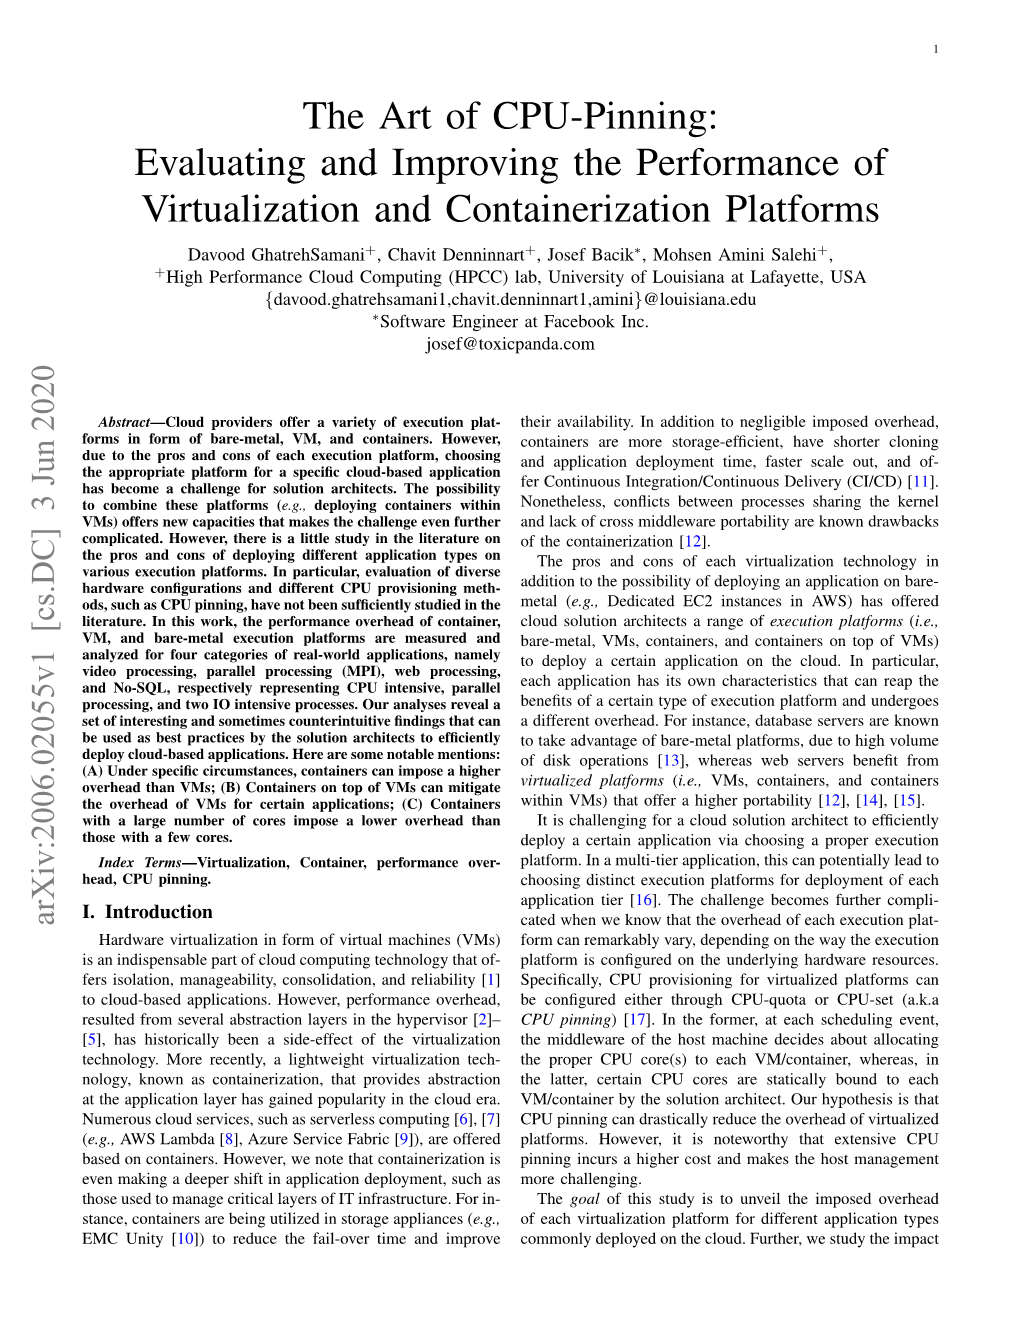 The Art of CPU-Pinning: Evaluating and Improving the Performance of Virtualization and Containerization Platforms